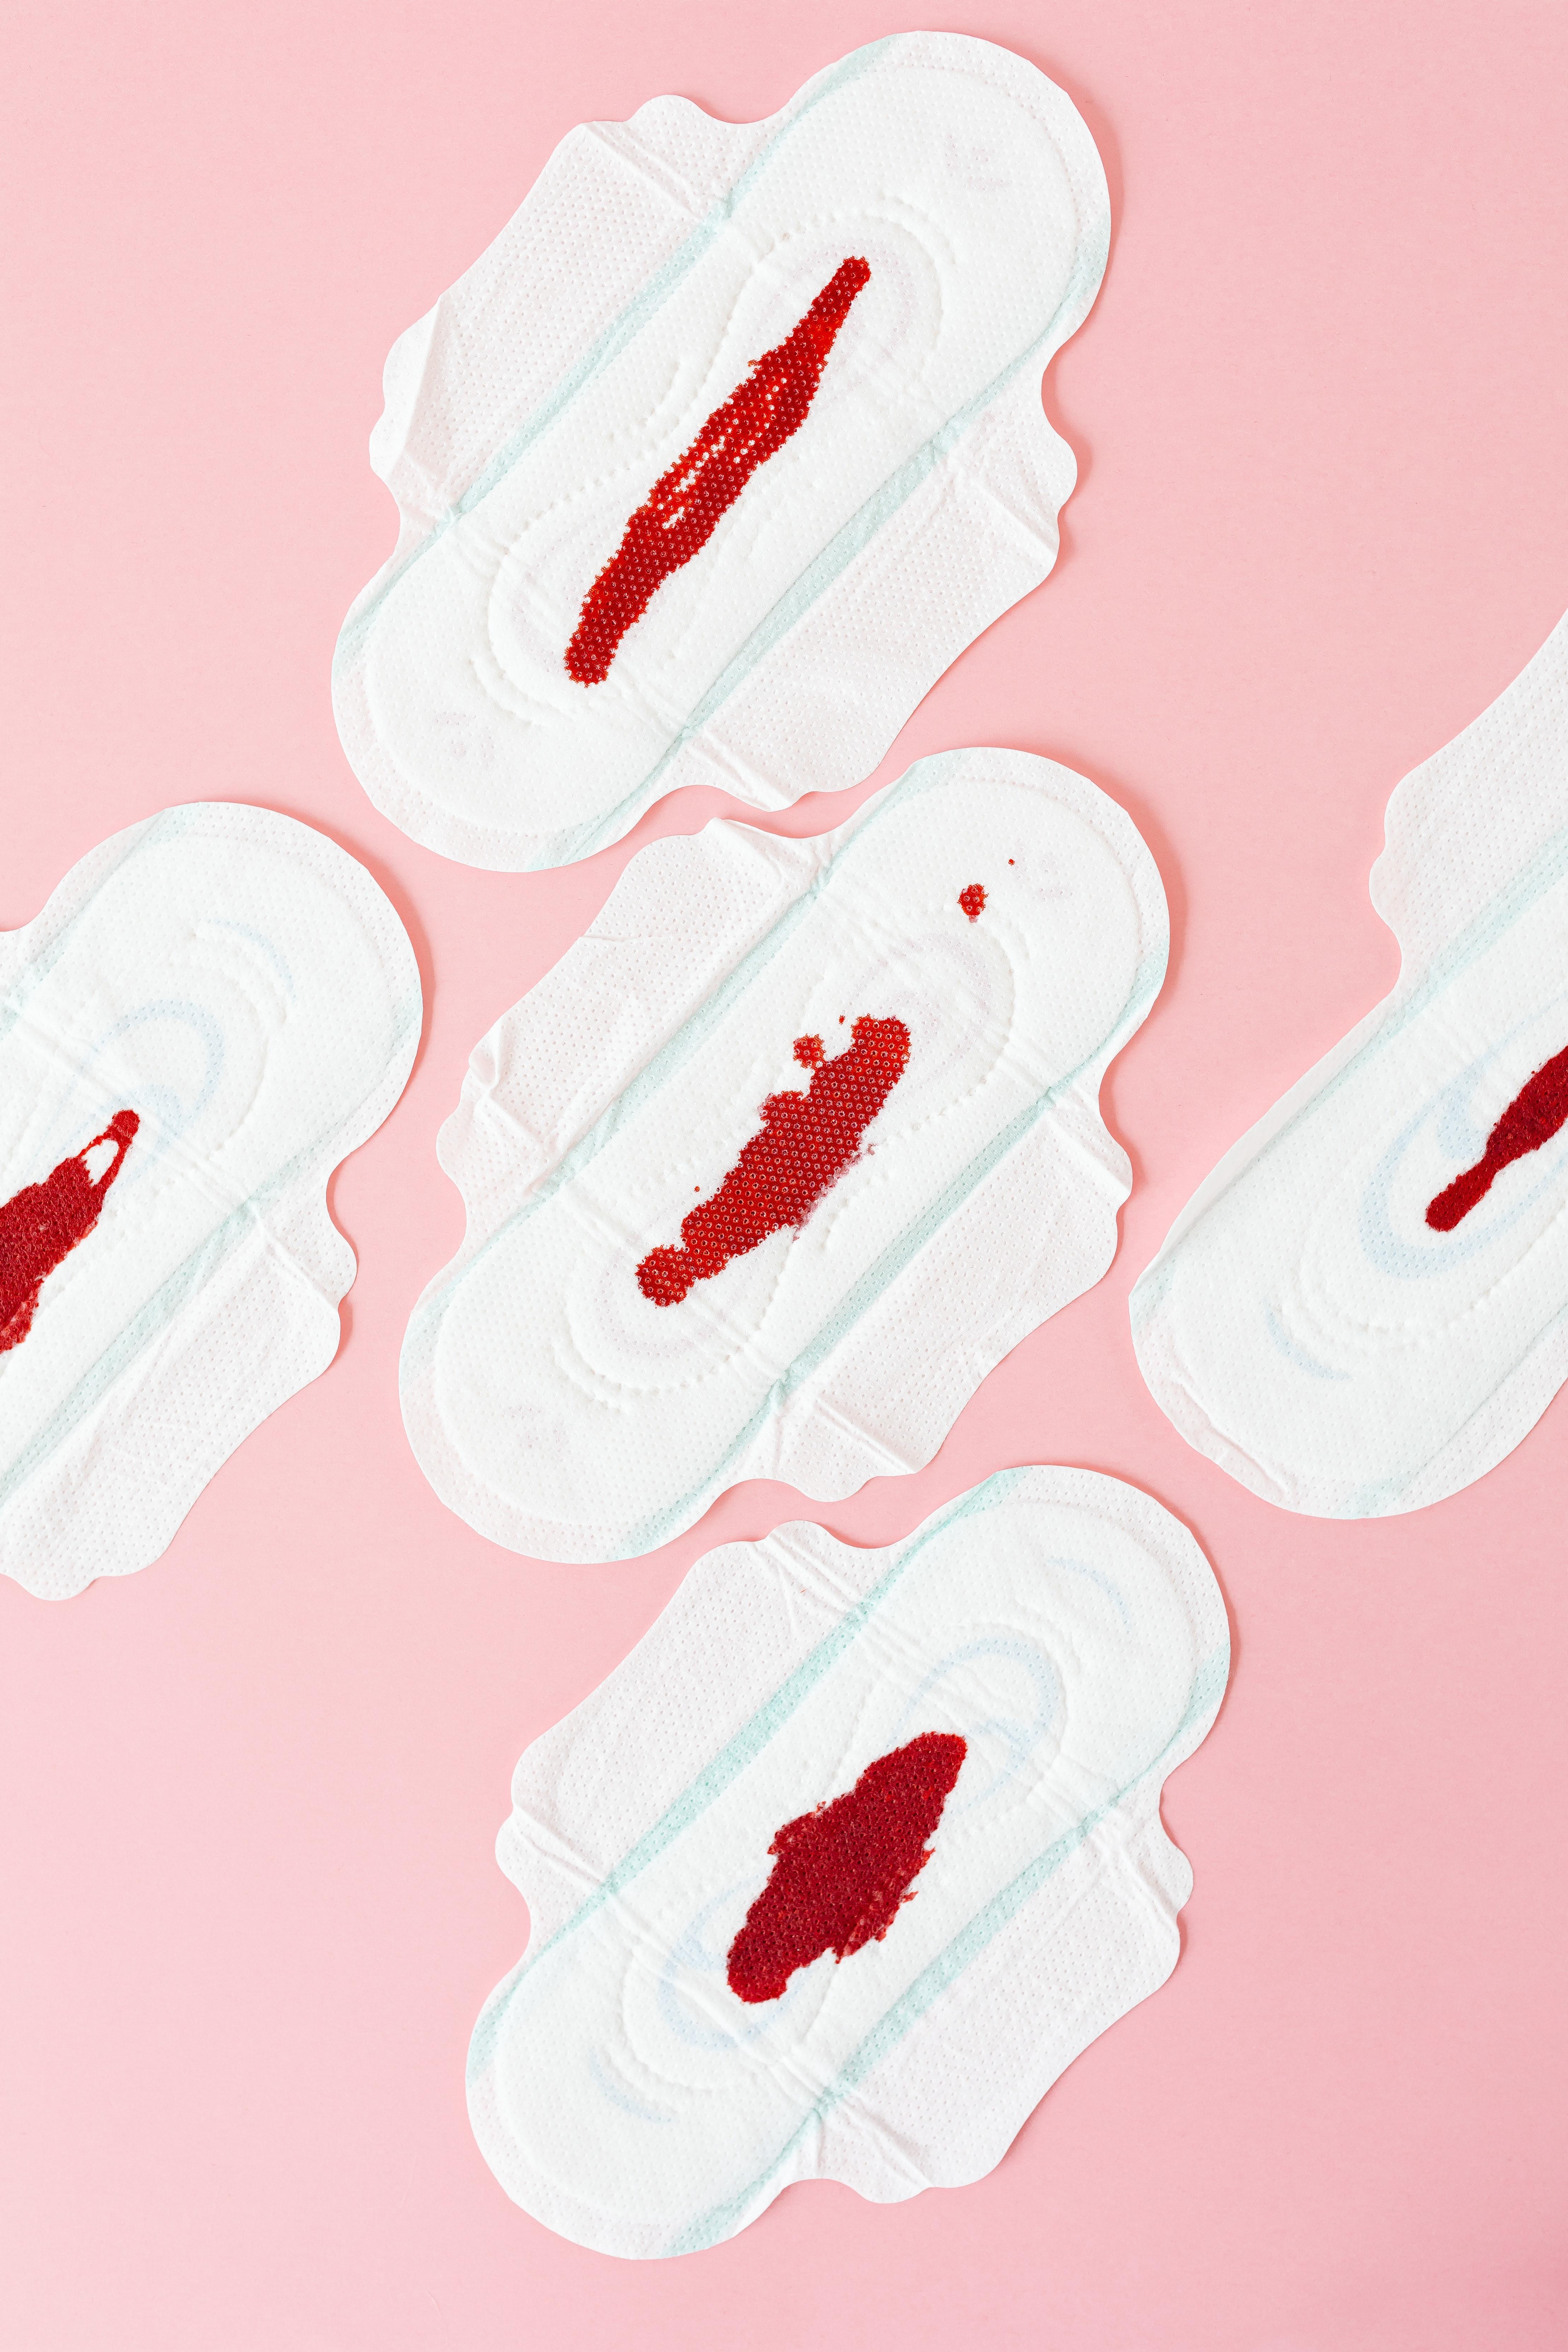 How Do You Flush Out Old Period Blood 